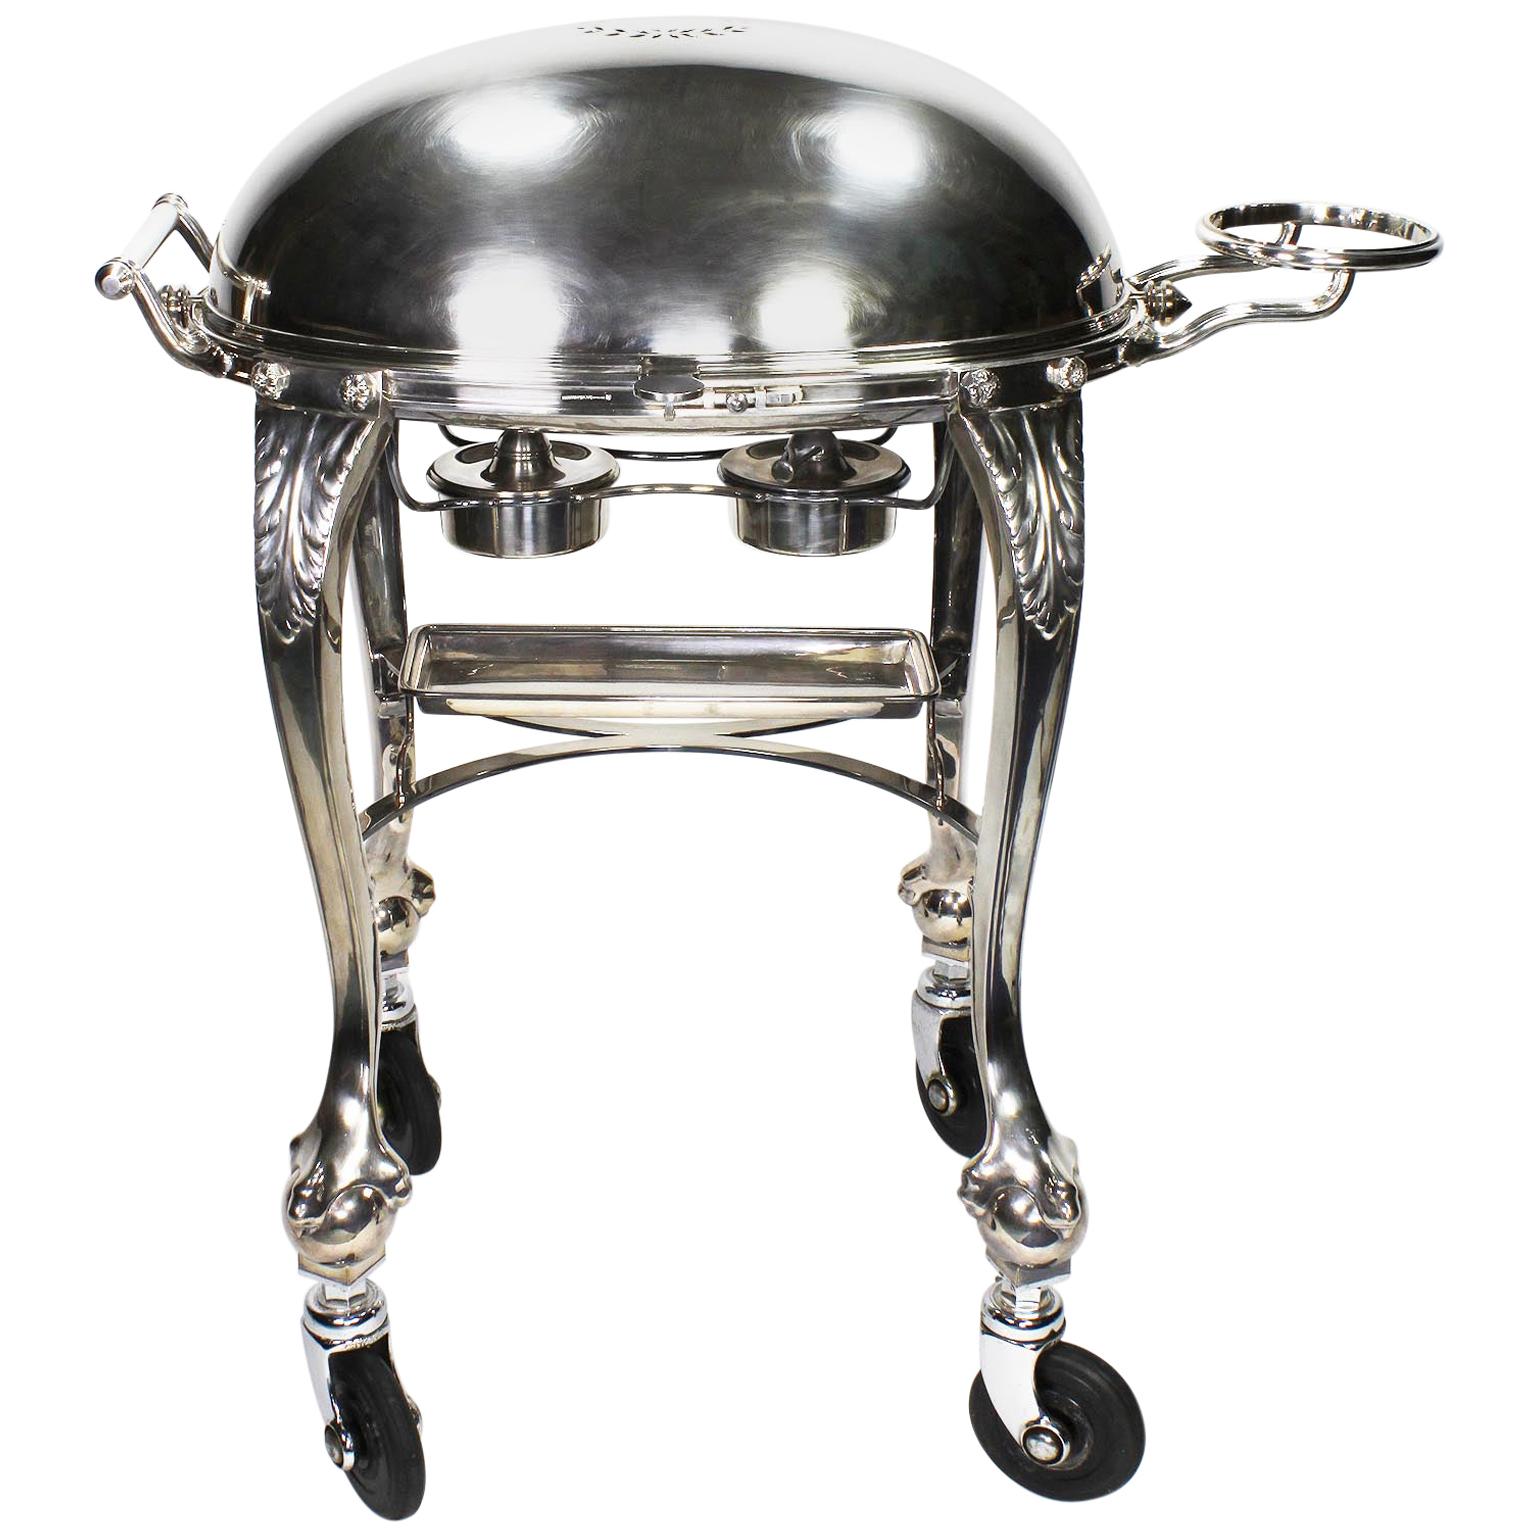 English Silver Plated Art Nouveau Meat Carving Trolley Cart by Elkington